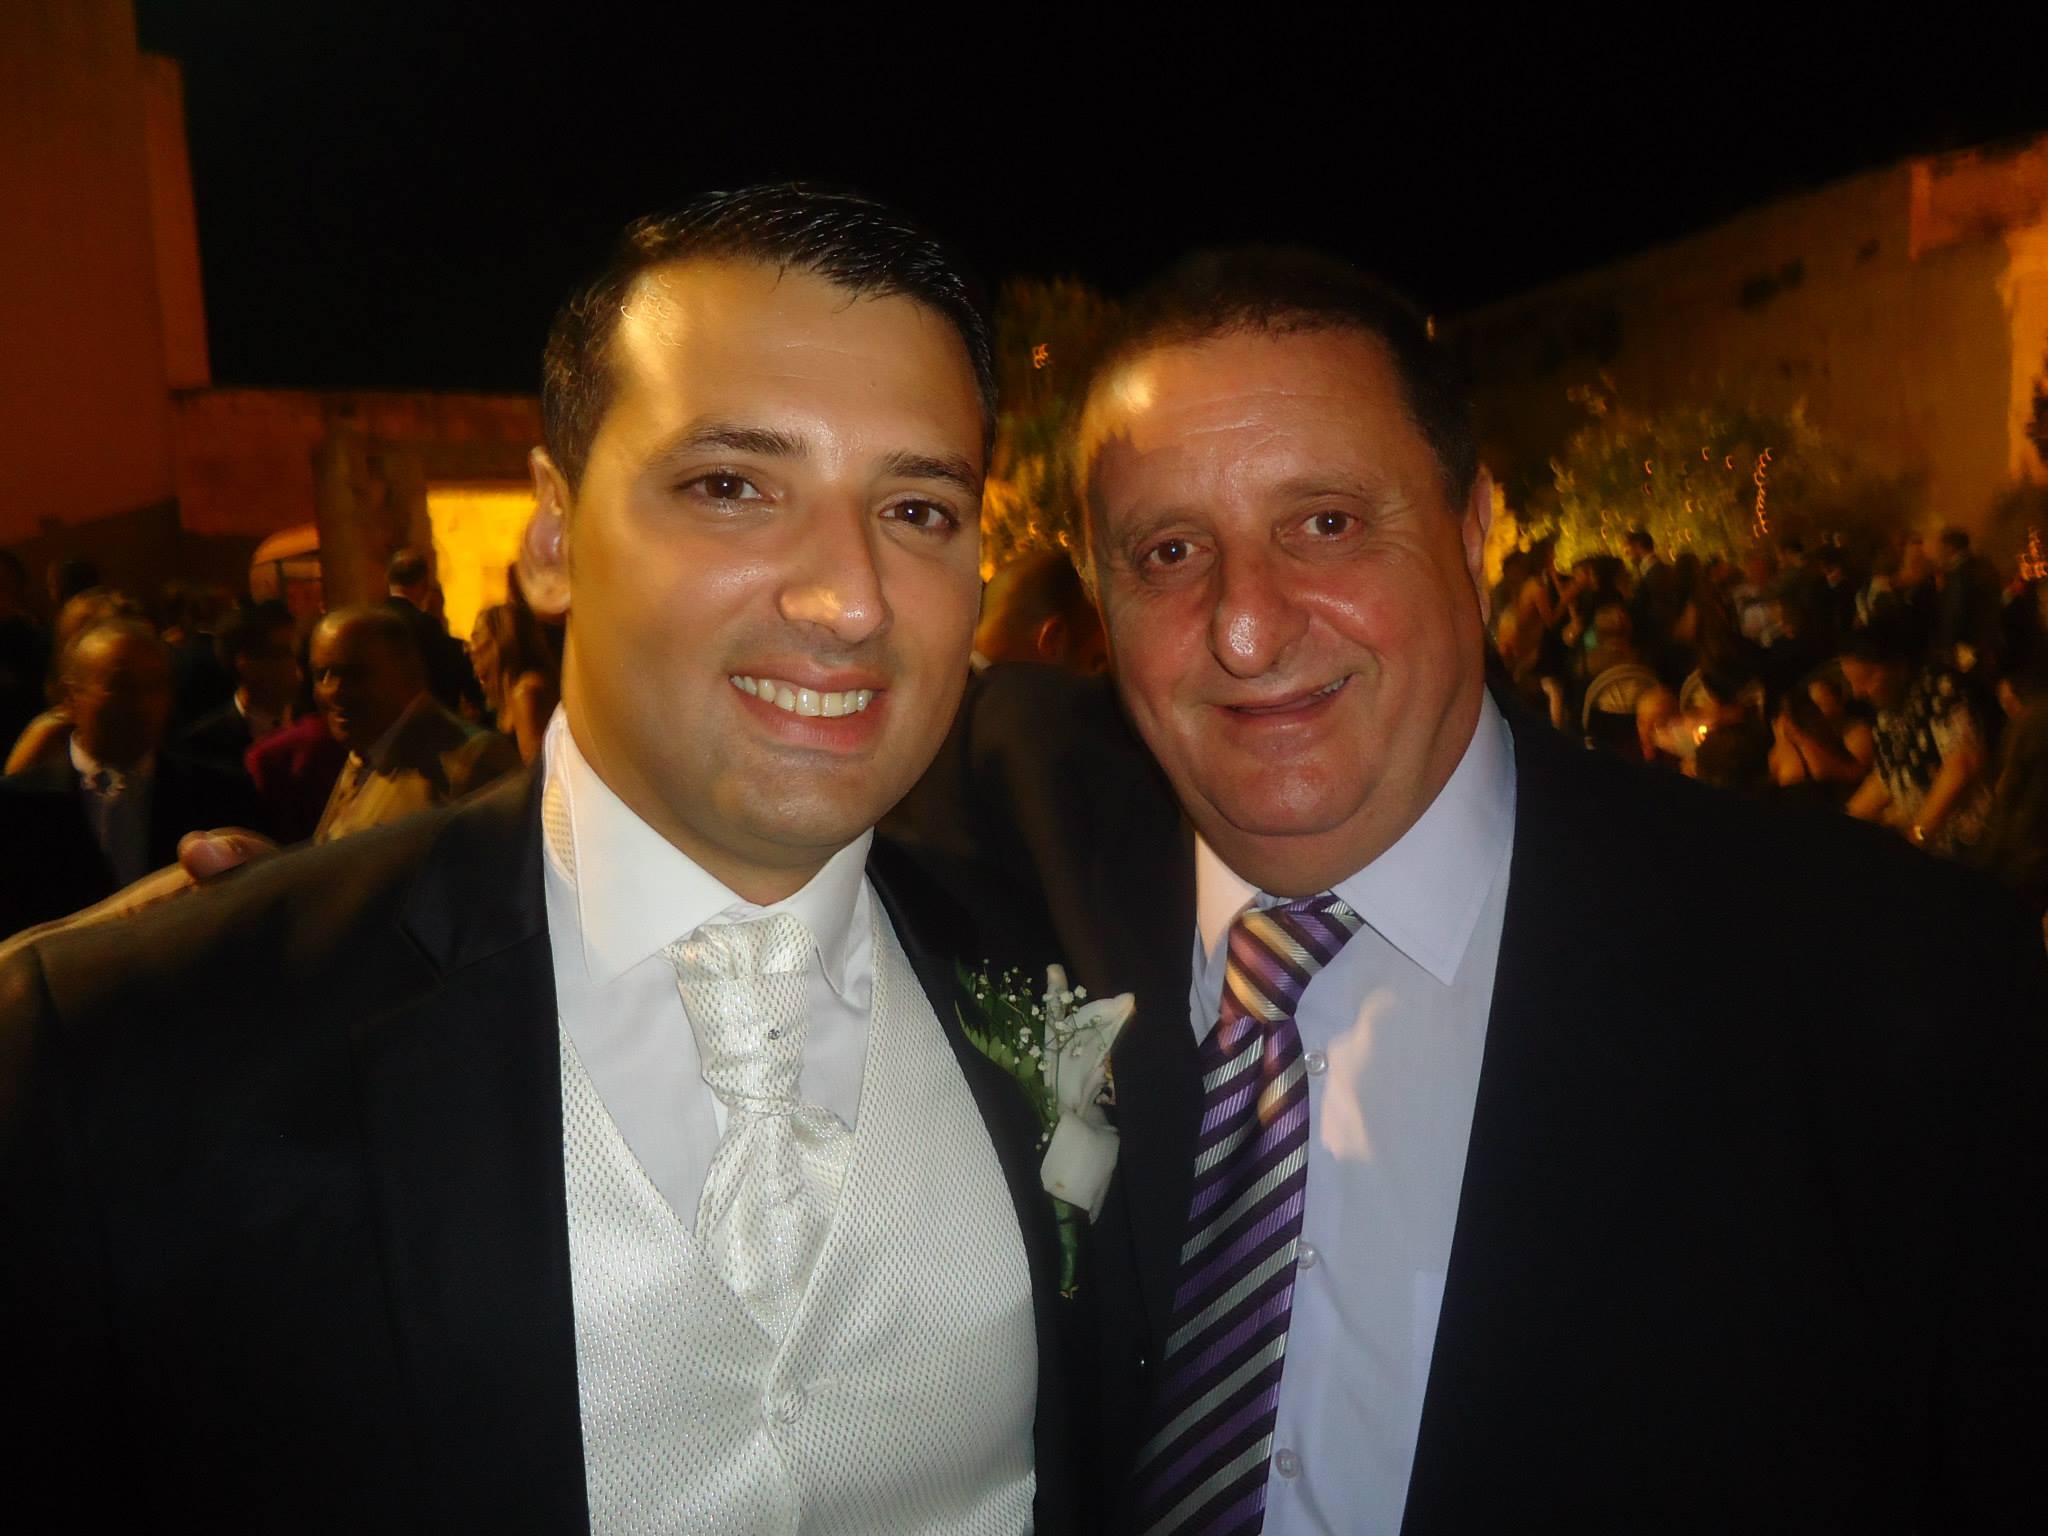 Silvio Debono was an honoured guest at the wedding of Jonathan Attard (shown here at the wedding reception). In March 2013, Attard was transferred from the Labour Party payroll, where he was a newscaster with Super One TV, to the state payroll, as an aide to Economy Minister Chris Cardona.